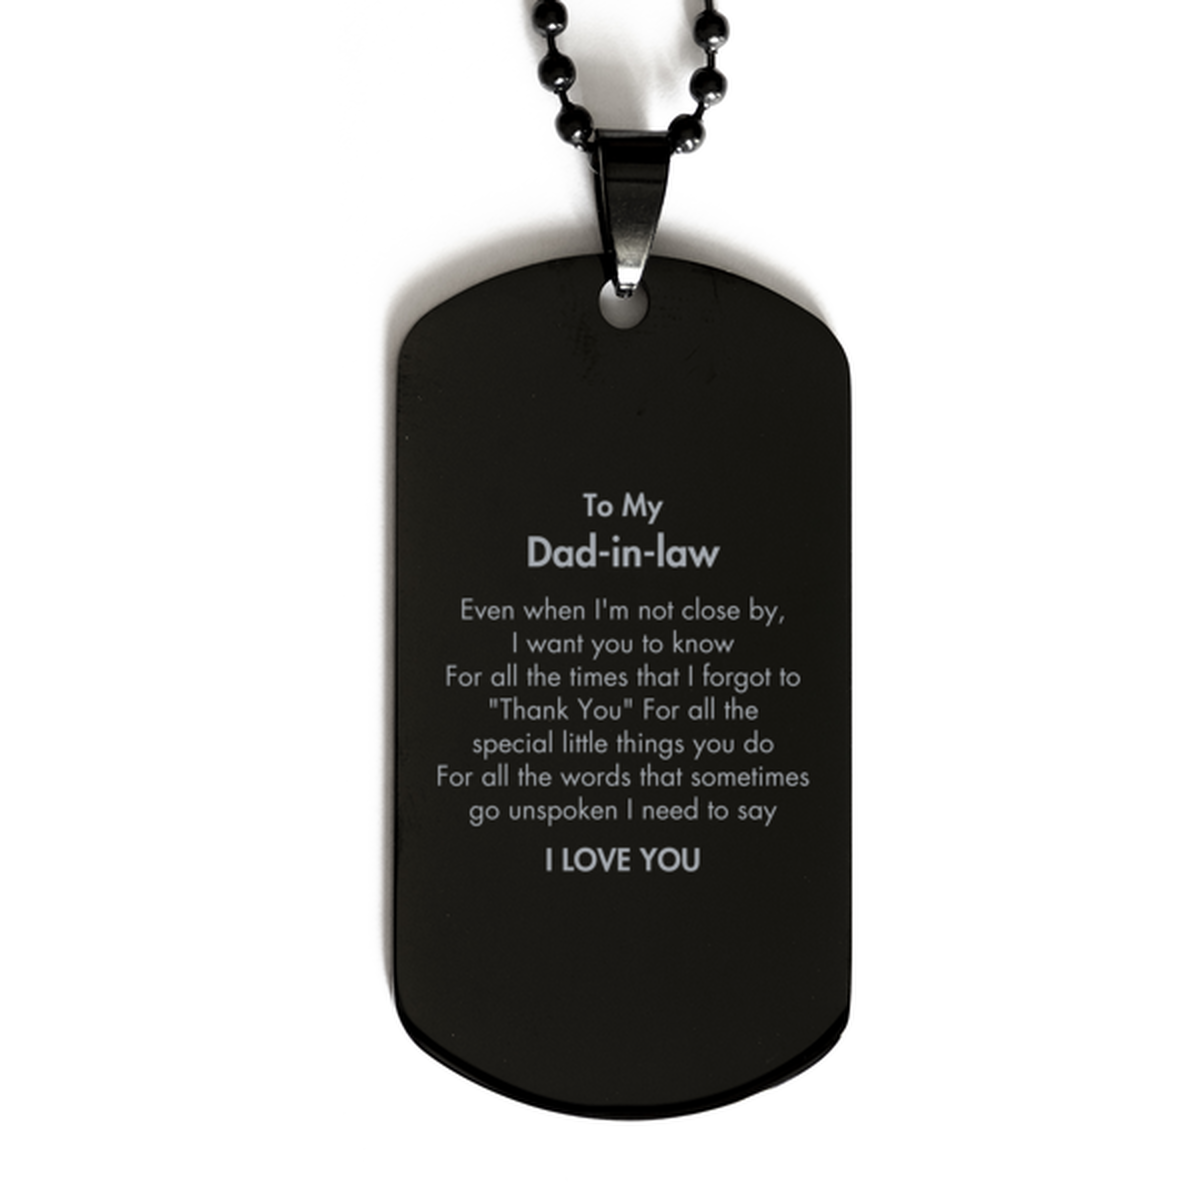 Thank You Gifts for Dad-in-law, Keepsake Black Dog Tag Gifts for Dad-in-law Birthday Mother's day Father's Day Dad-in-law For all the words That sometimes go unspoken I need to say I LOVE YOU